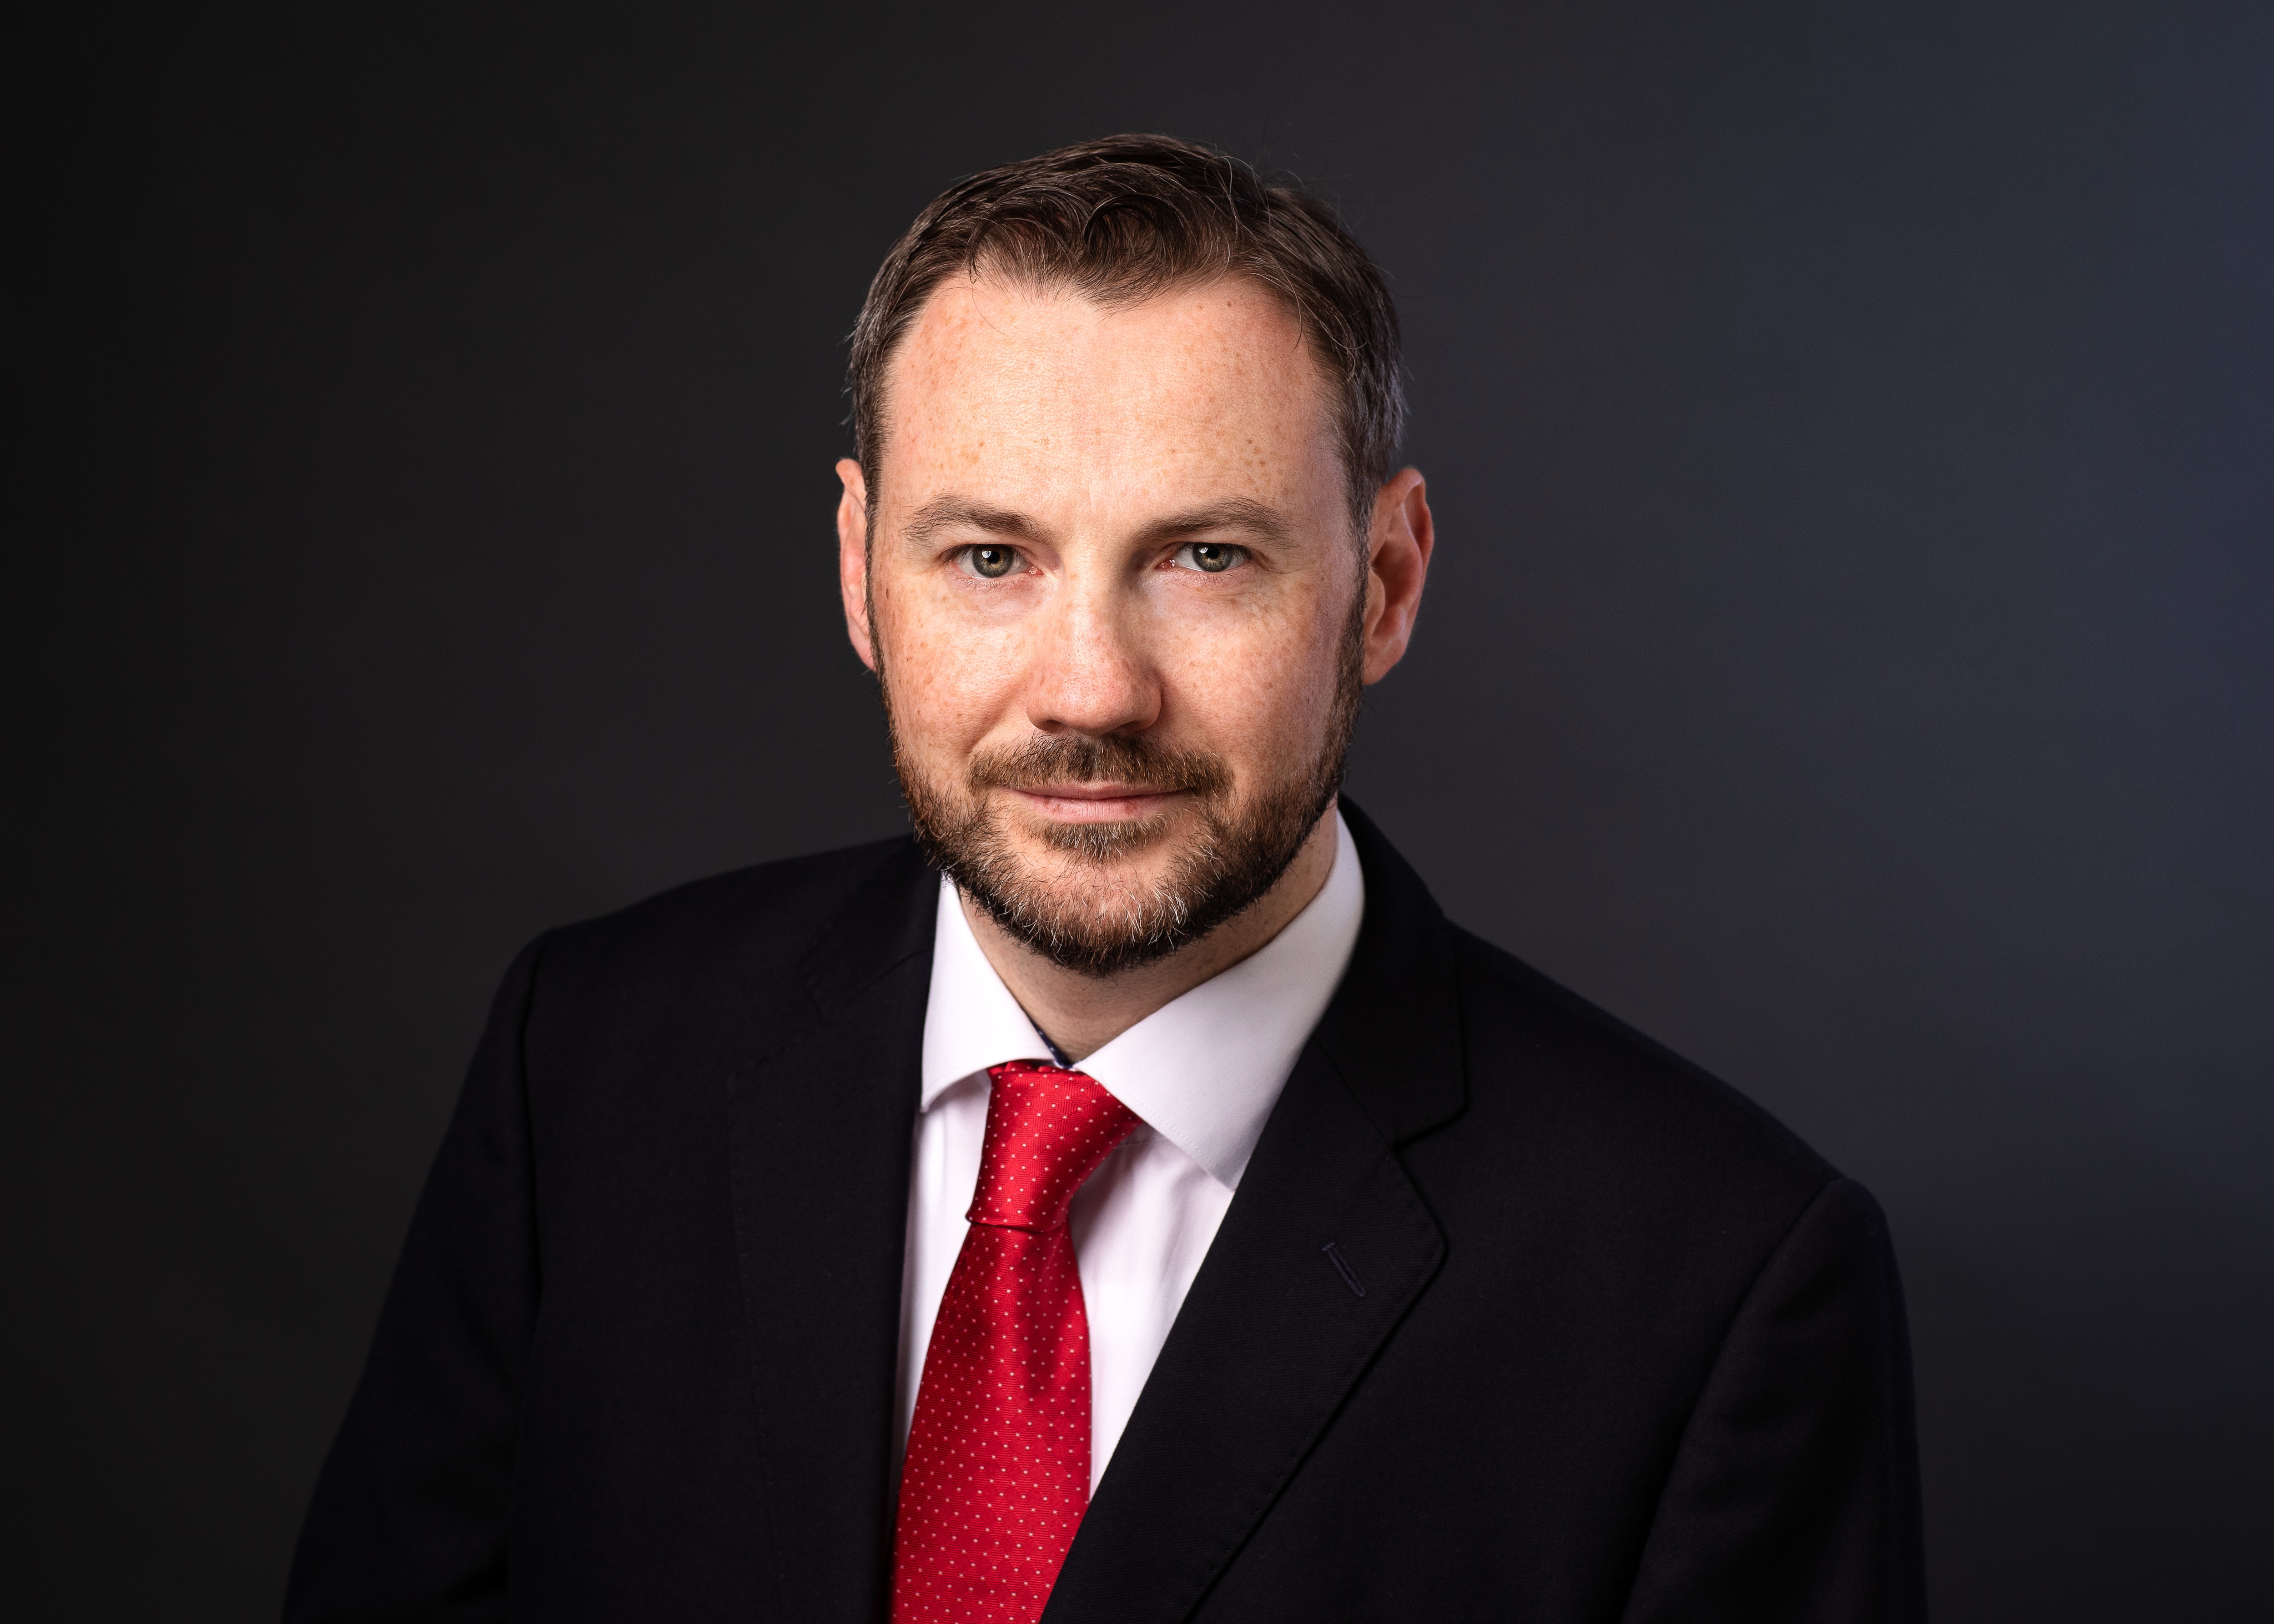 Expert profile image of Alan Keating, Head of Management Company, Northern Trust Asset Management Ireland - 